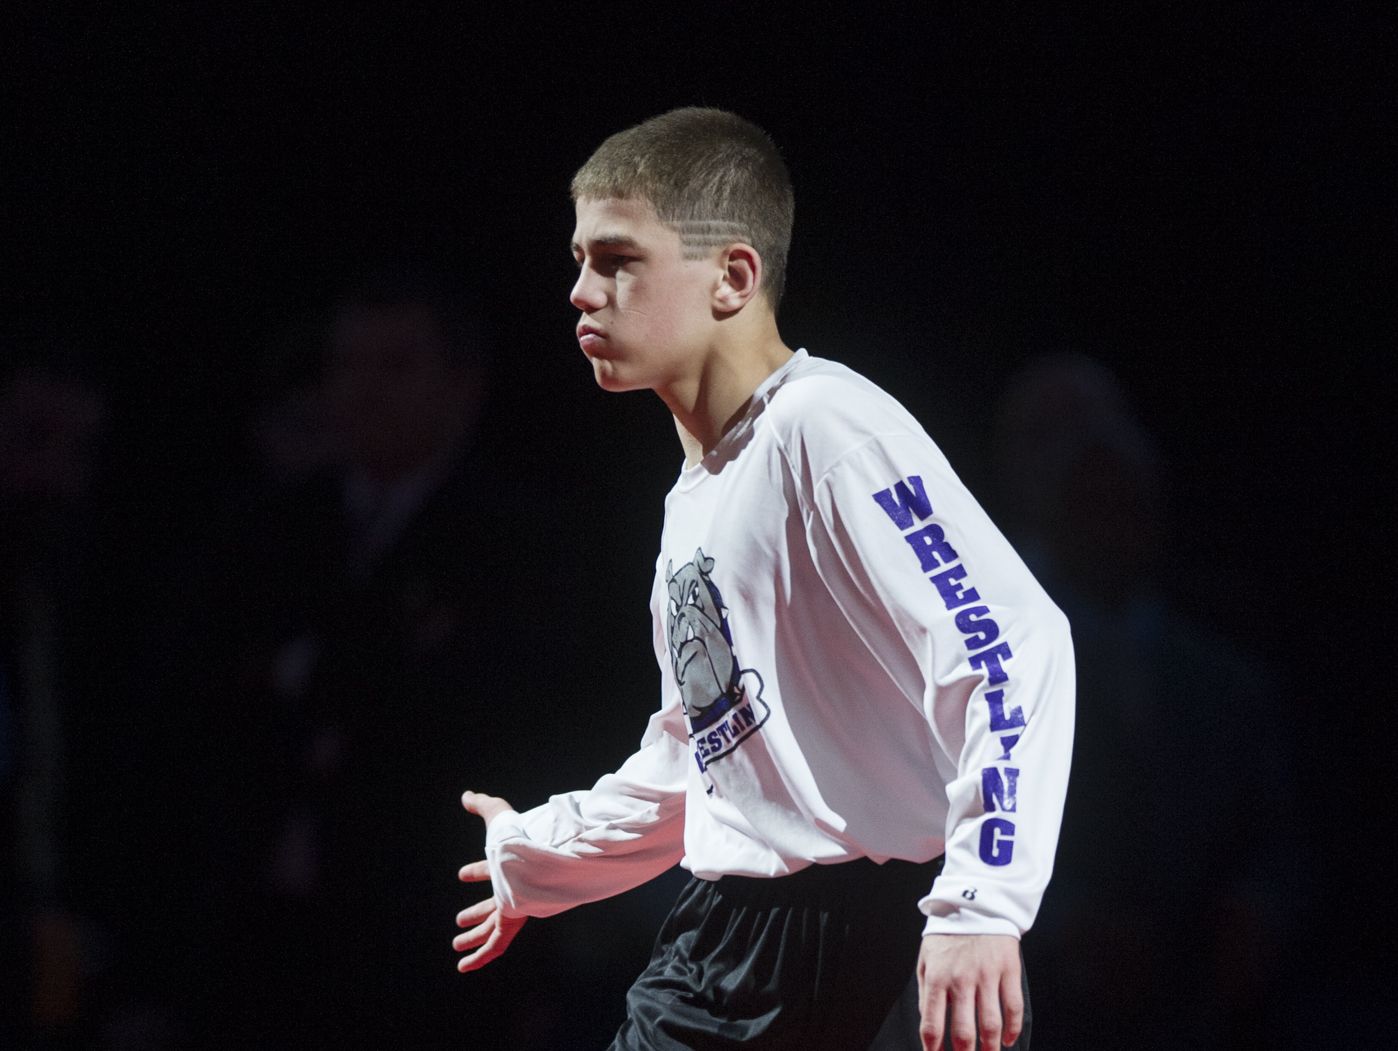 Brownsburg High School wrestler Tyler Mills is introduced during opening ceremonies in the 106-pound weight class. The 77th Annual IHSAA State Wrestling Finals at Bankers Life Fieldhouse in Indianapolis, Saturday, Feb. 21, 2015.